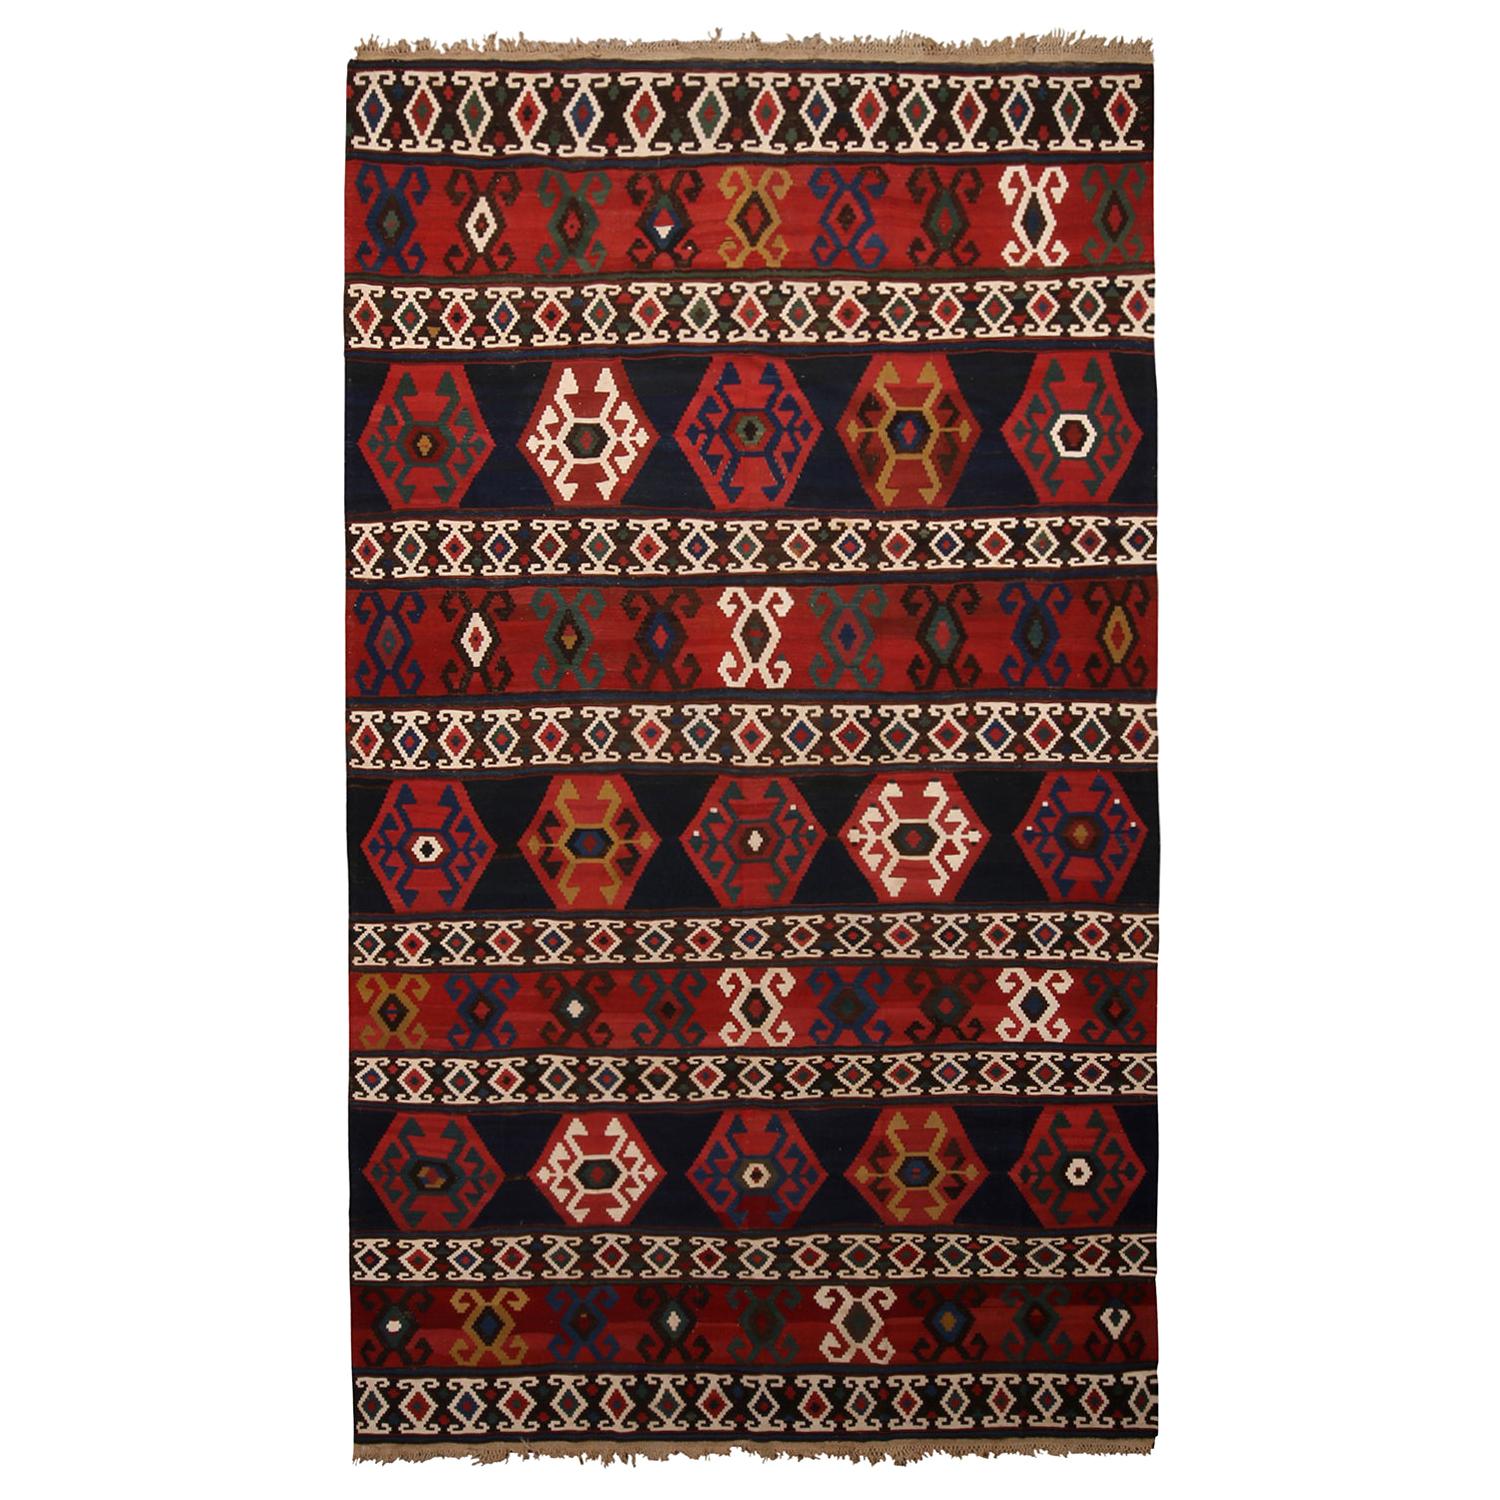 Antique Geometric Navy Blue and Burgundy Wool Kilim with White and Green Accents